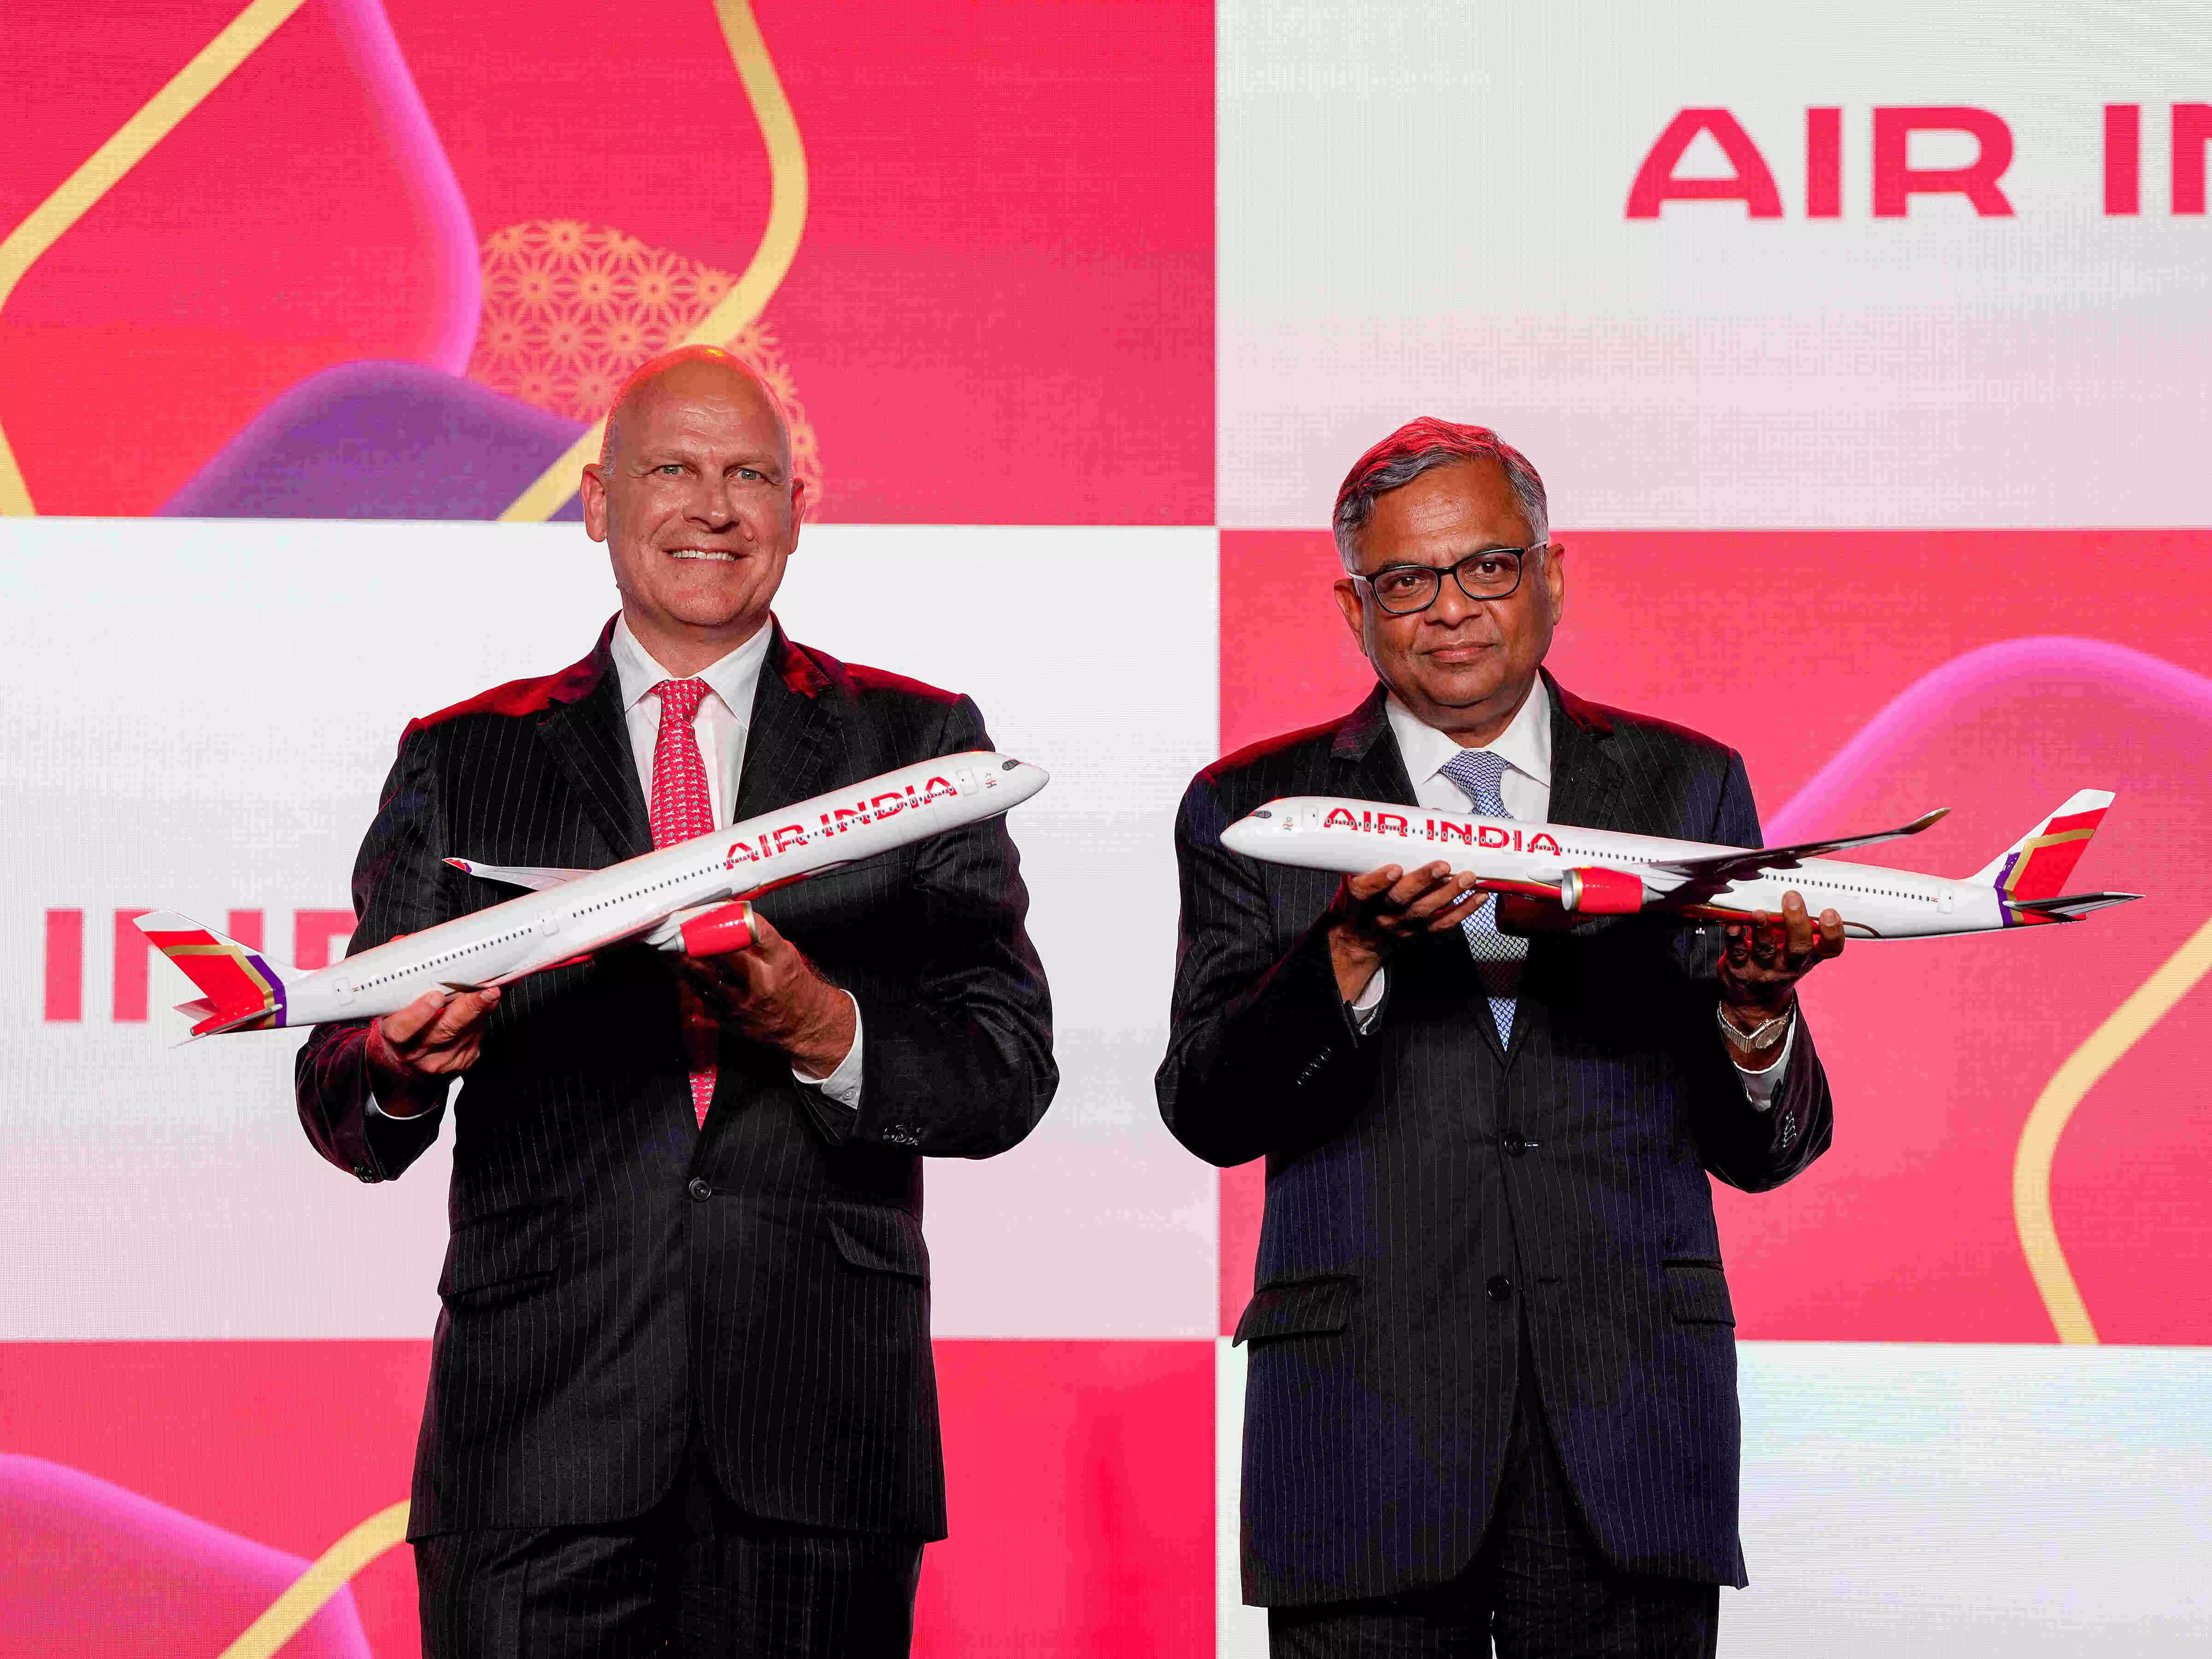 Air India unveils new brand identity, aircraft livery